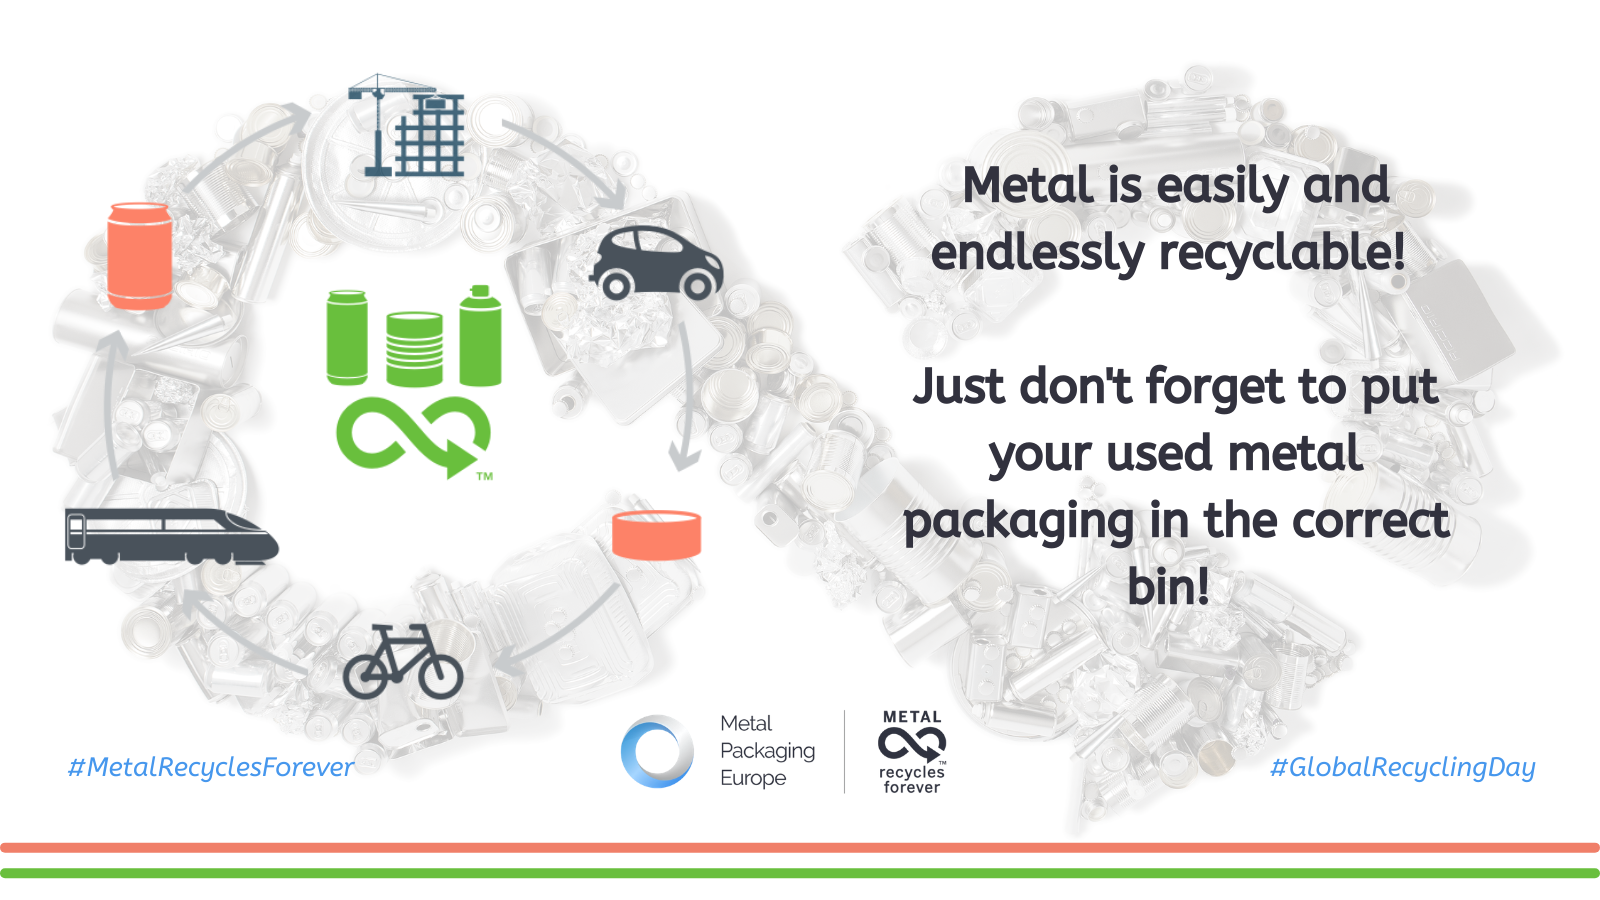 Metal is easily and endlessly recyclable